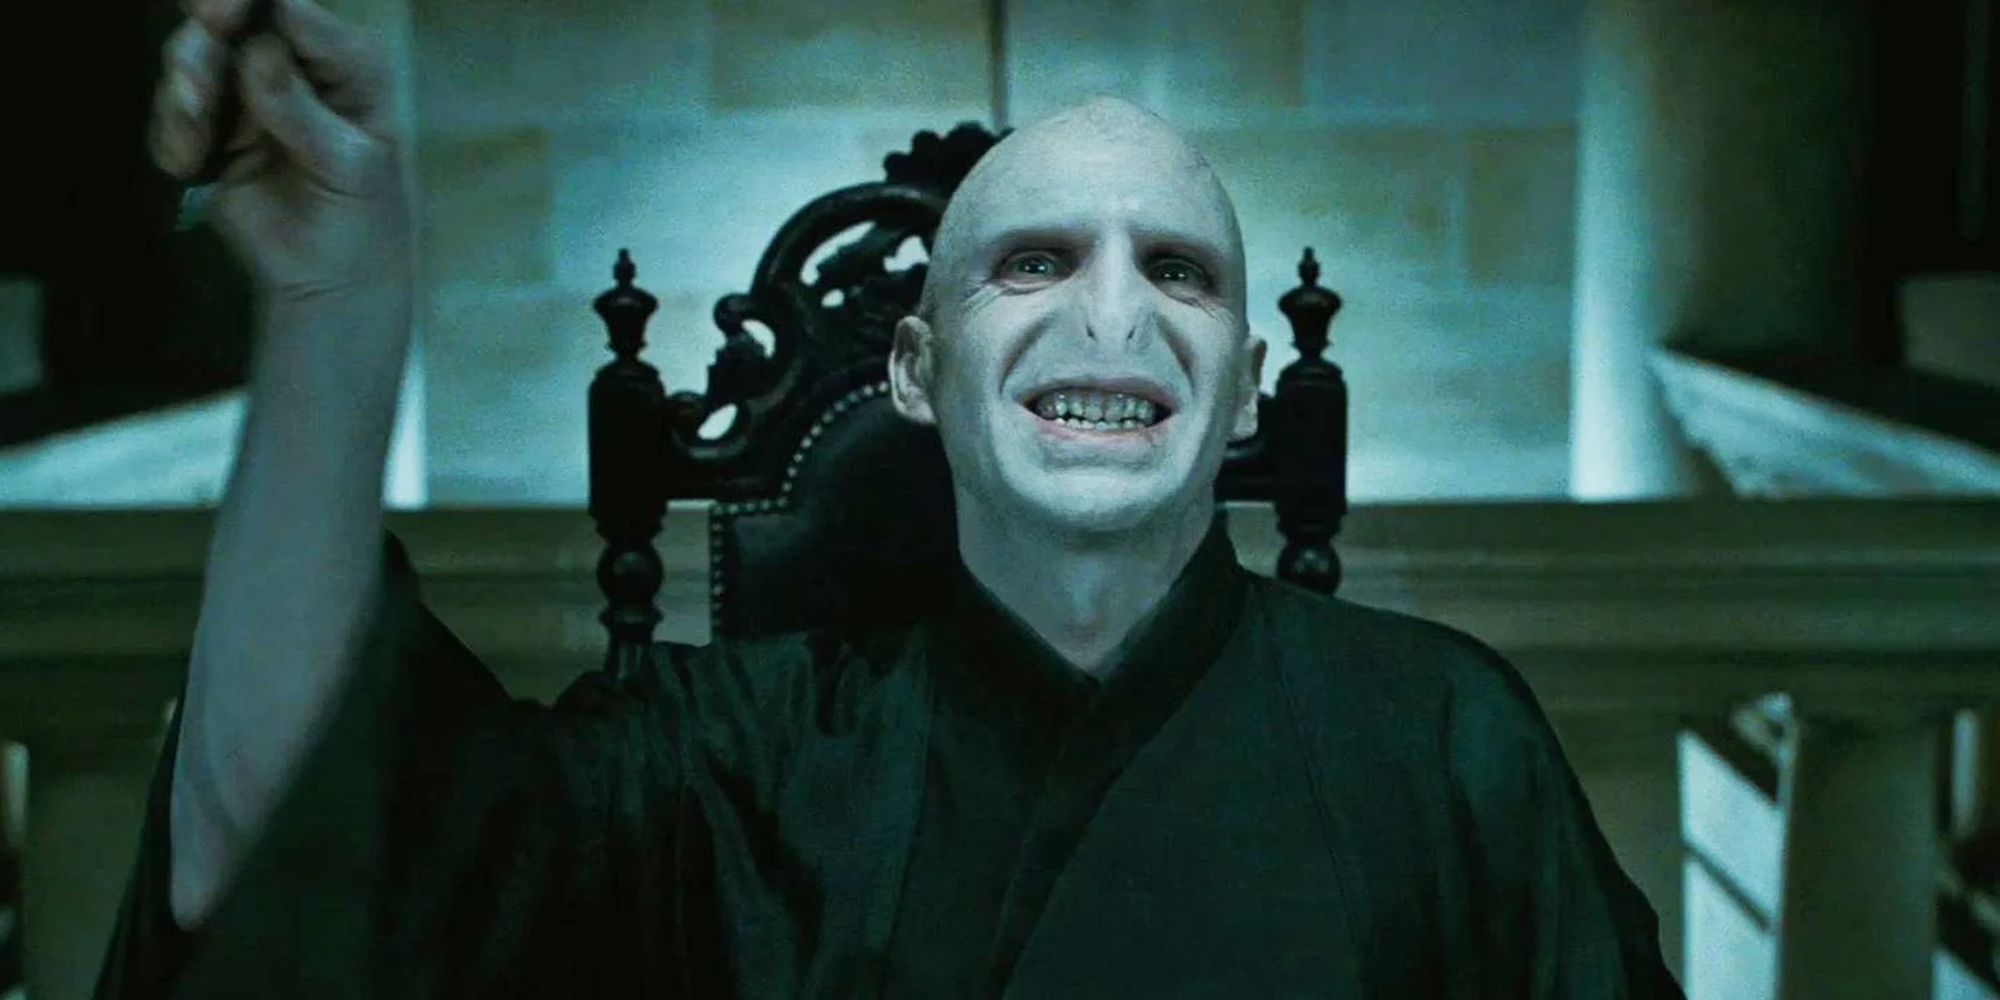 Voldemort kills Hogwarts professor Charity Burbage in Harry Potter and the Deathly Hallows